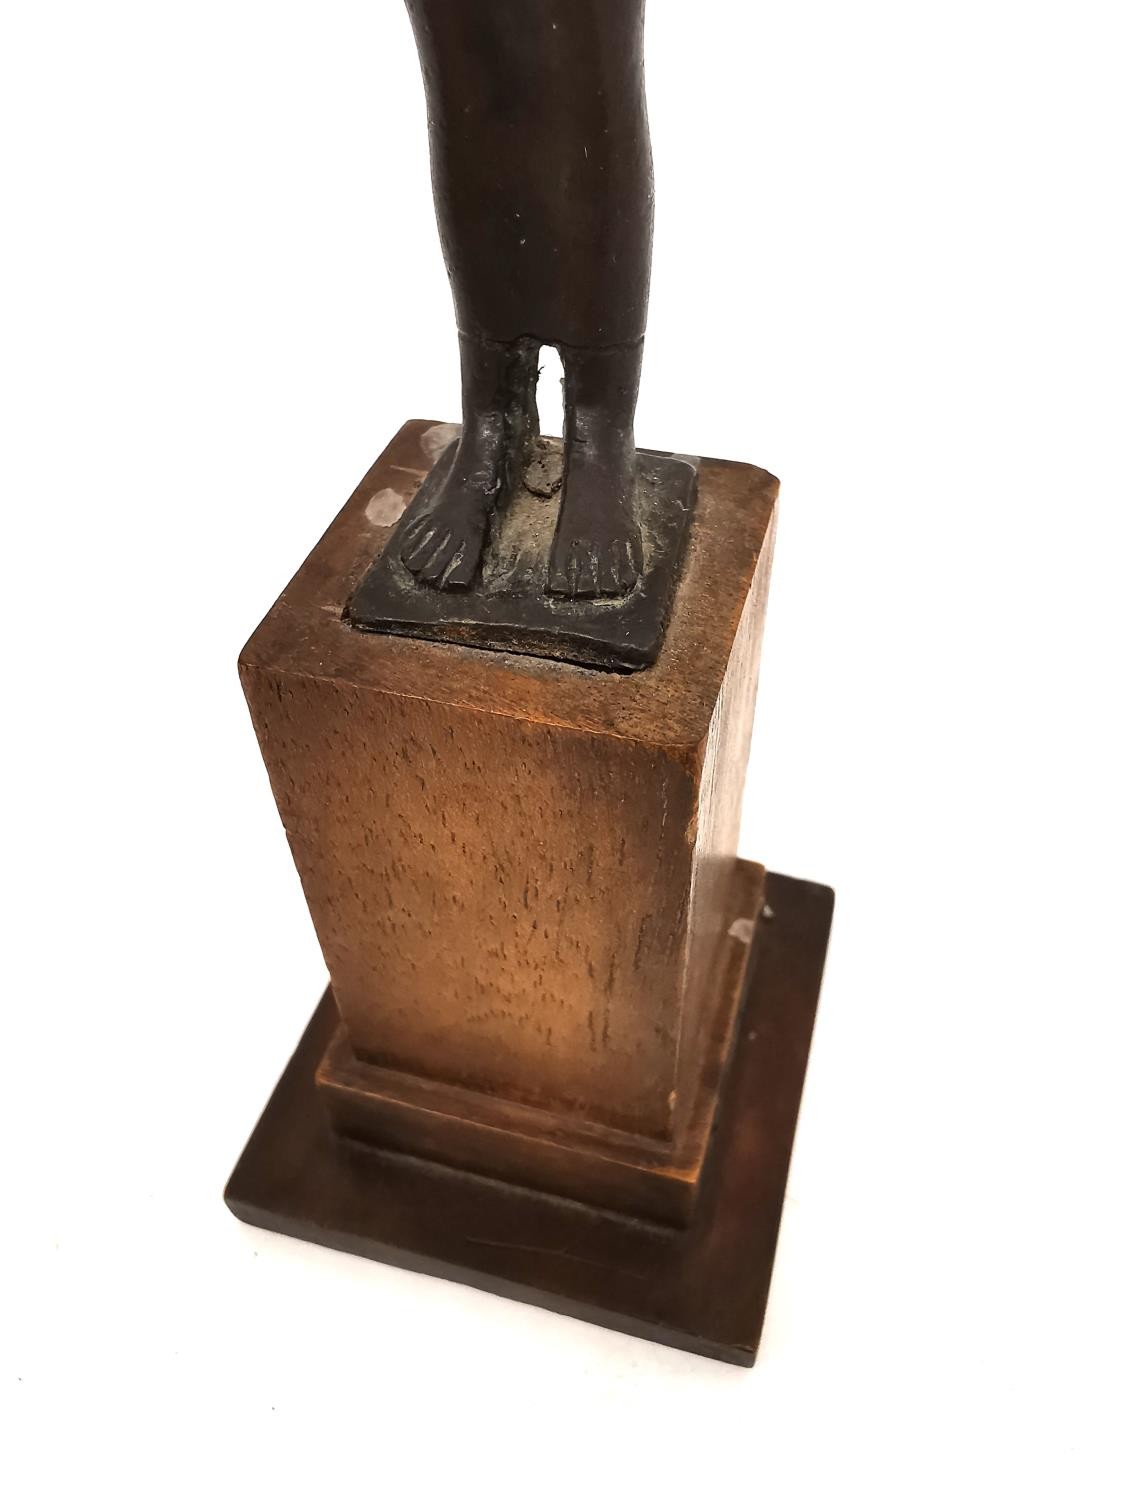 A 19th century Egyptian style bronze statue of an Egyptian god mounted on a wooden stand. H.20cm. - Image 7 of 7